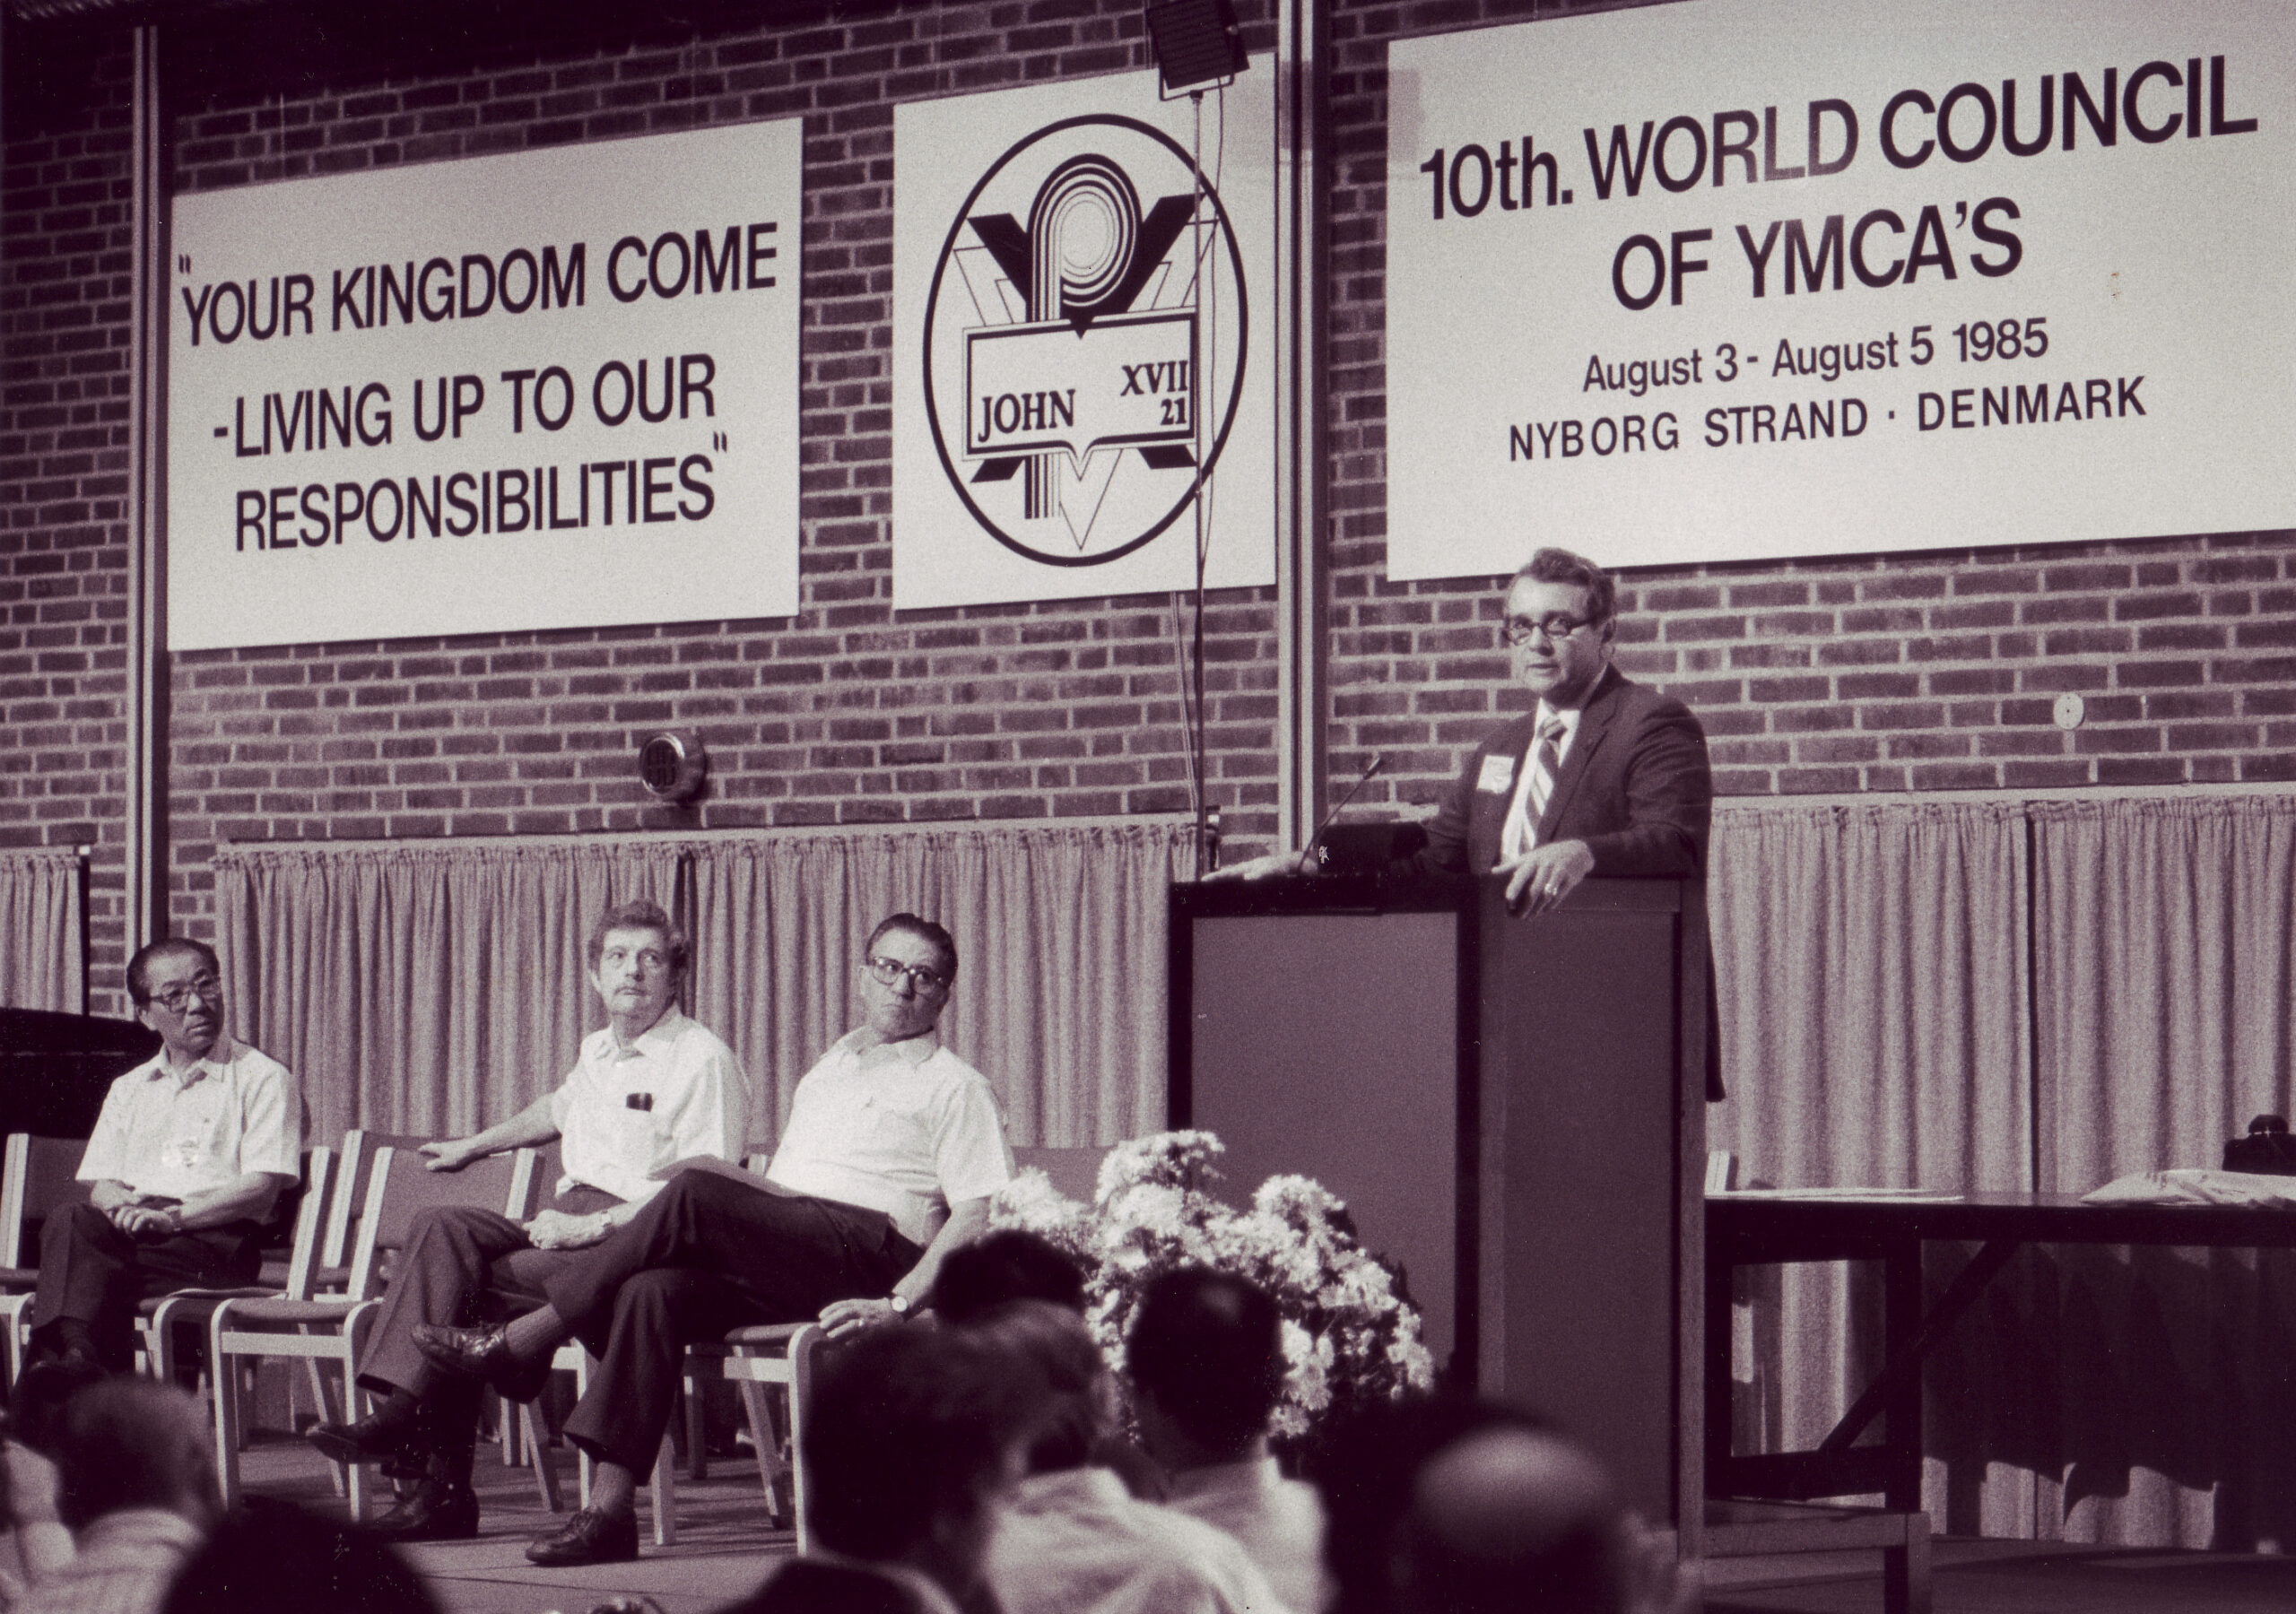 1985 The 9th YMCA World Council, Nyborgstrand (Denmark) - a new constitution, a Resolution on apartheid